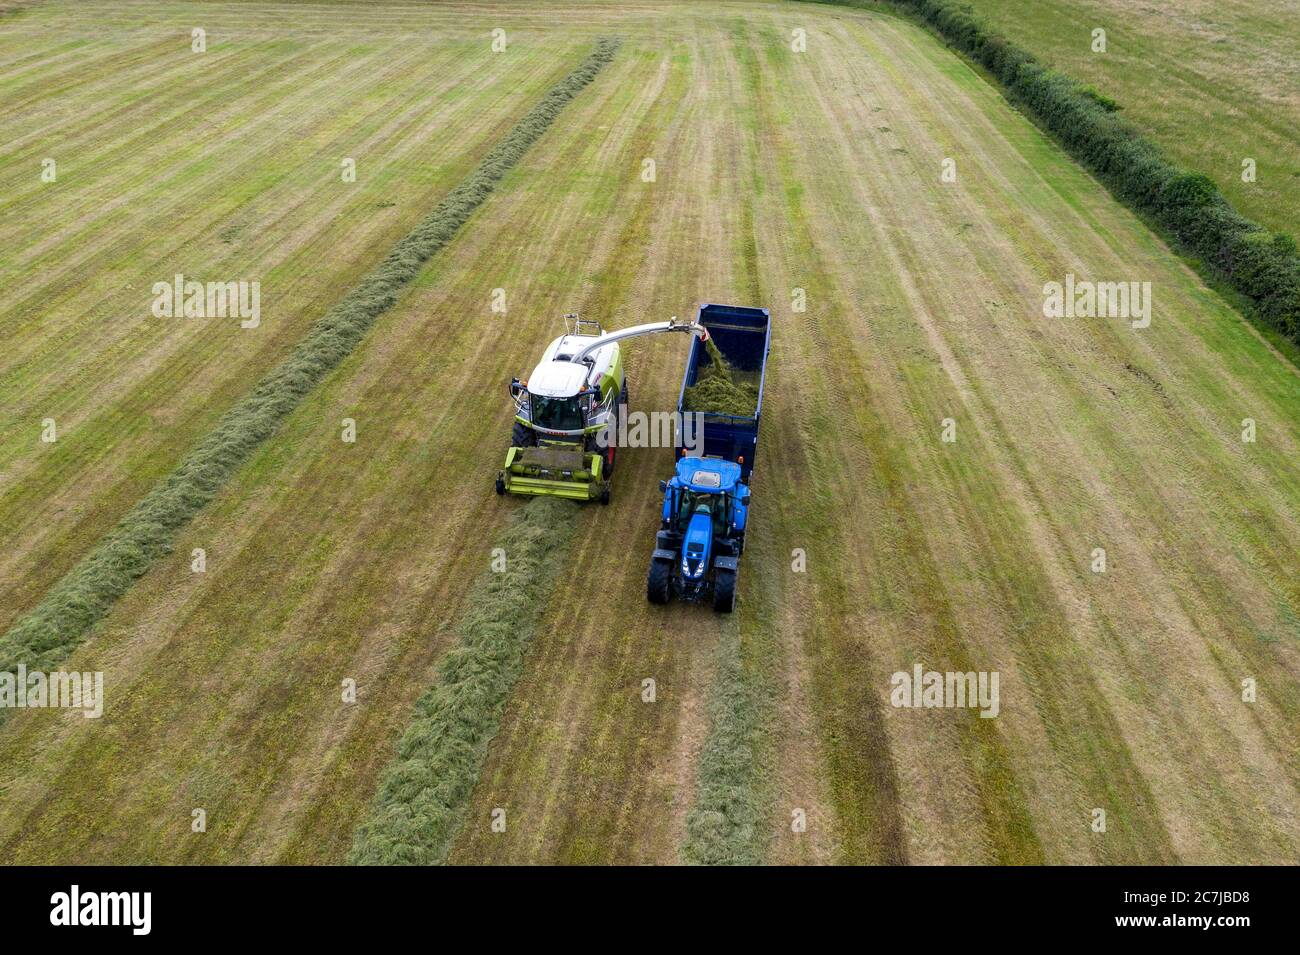 Aerial drone photograph of harvesting silage with the Class Jaguar 970 self-propelled harvester in rural County Kildare, Ireland Stock Photo